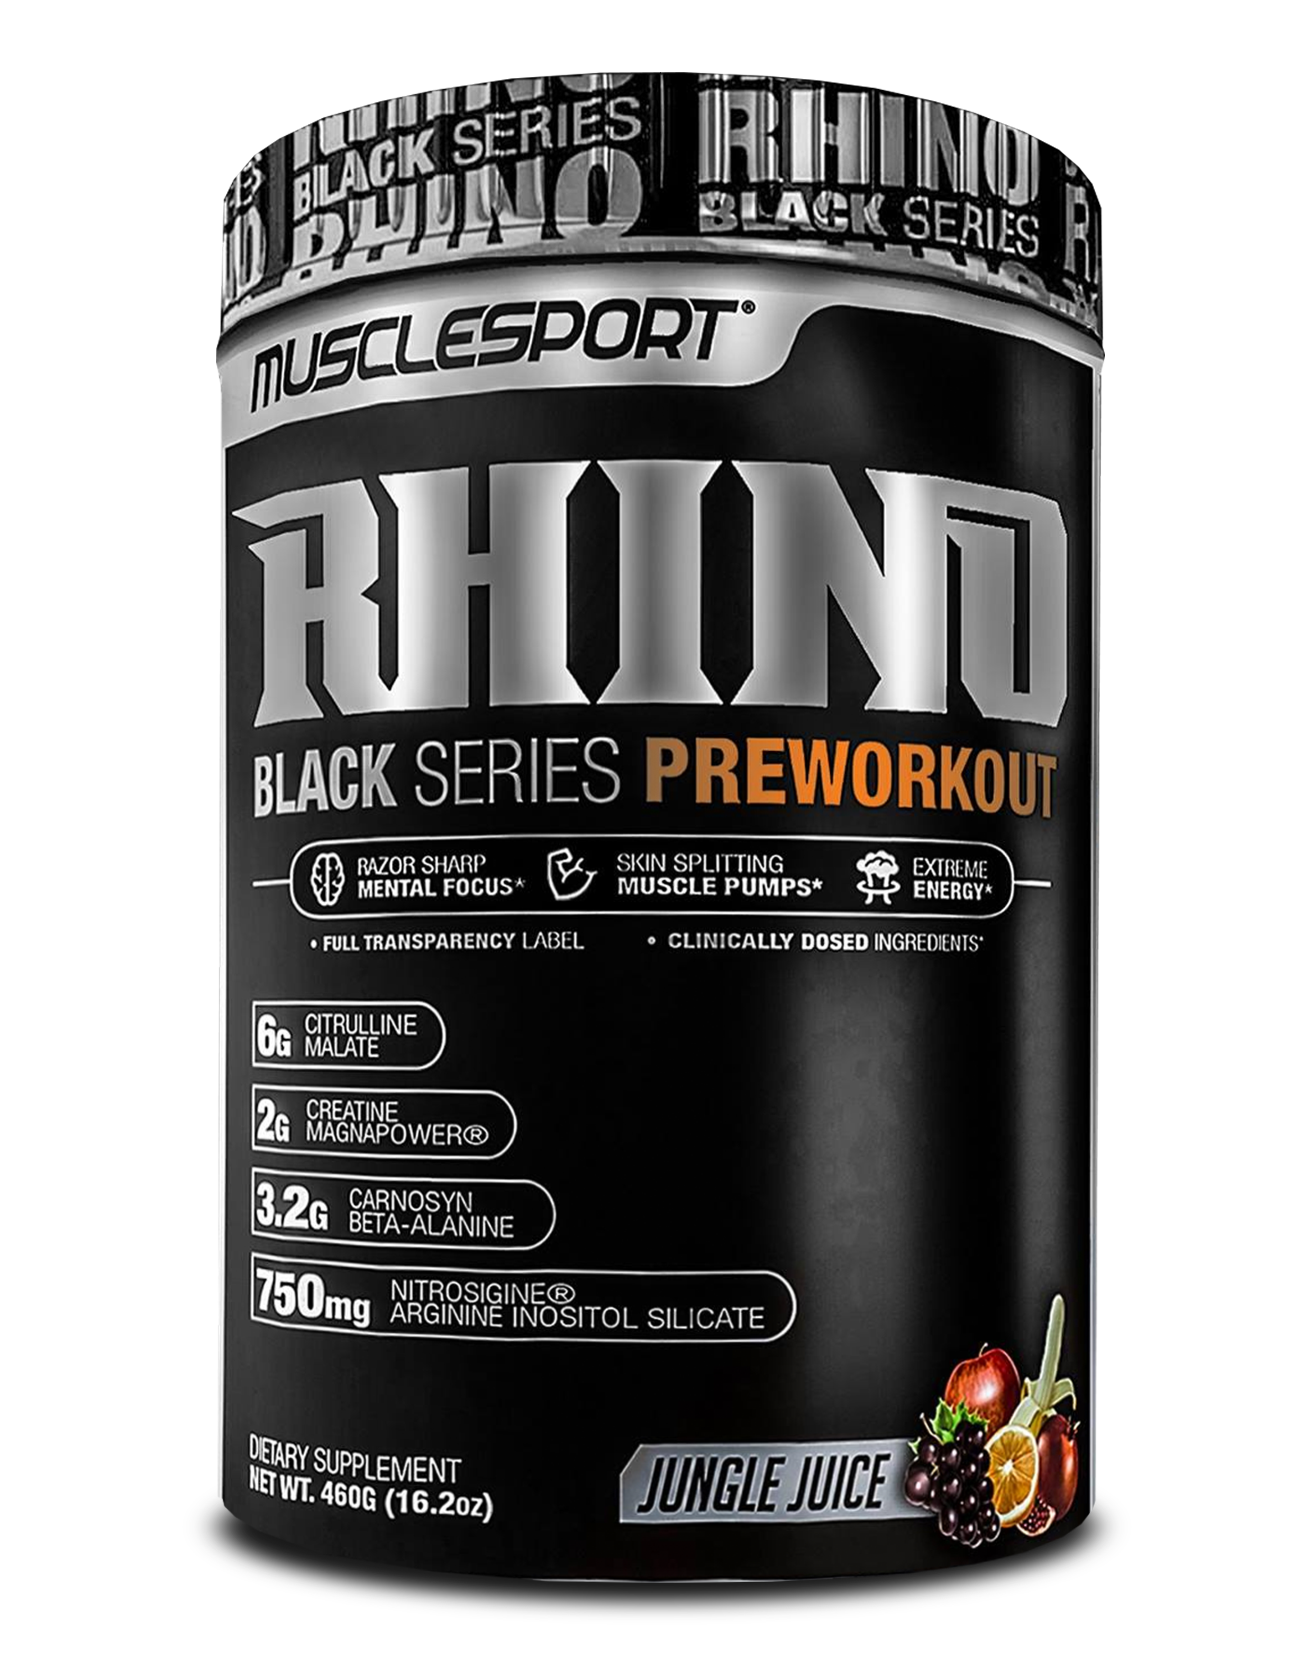 Rhino Black is the newest high energy, pump-centric workout from MuscleSport specifically tailored to give razor focus and skin-splitting pumps!